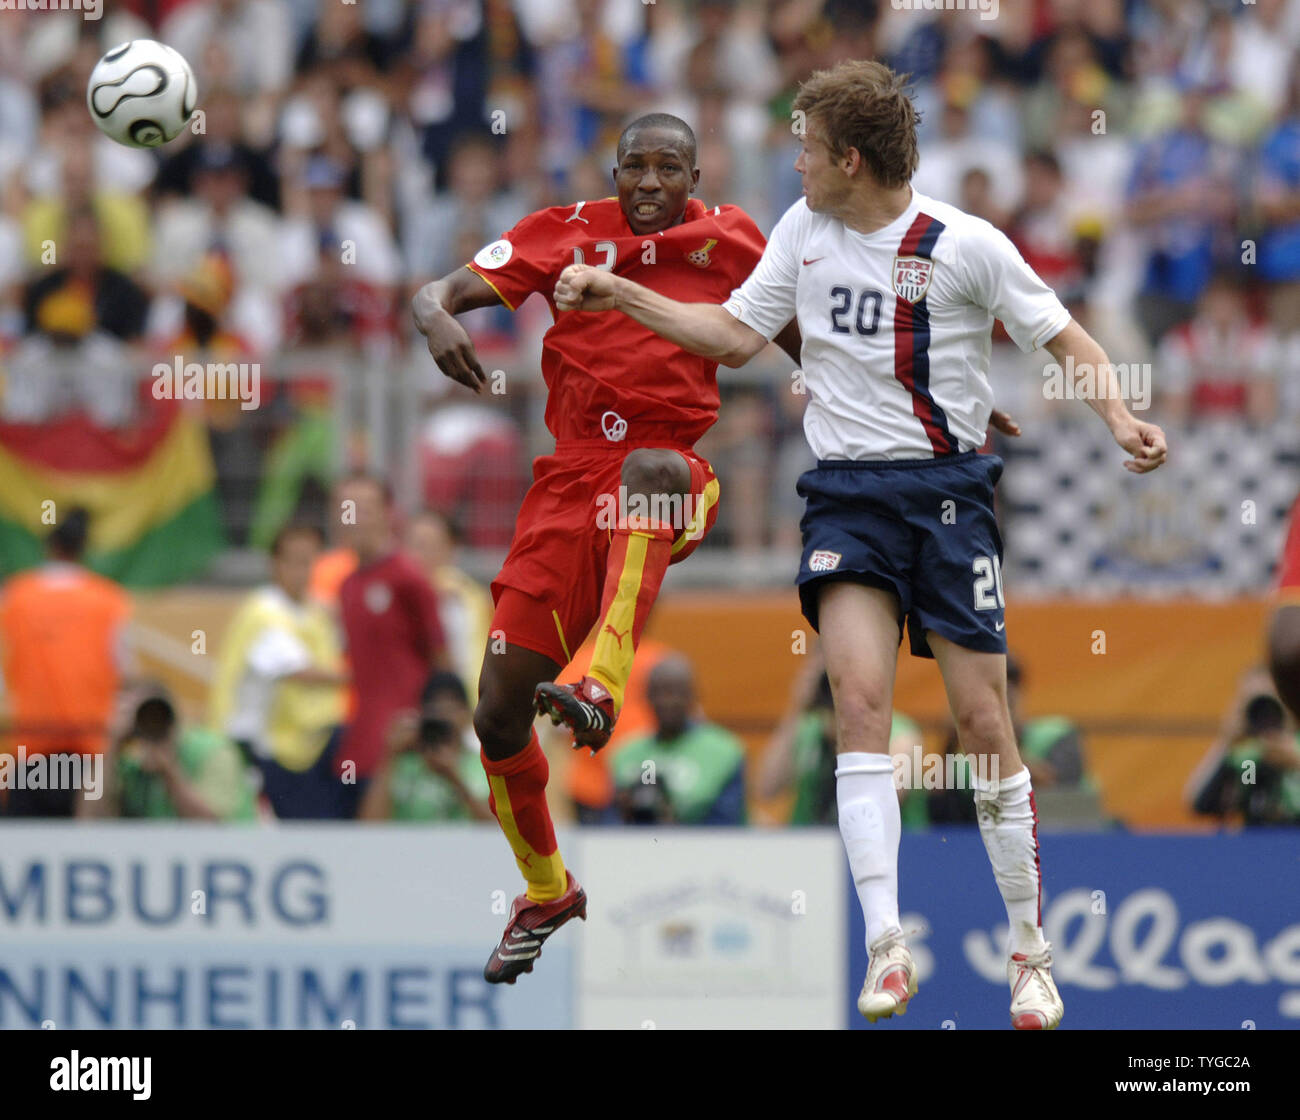 Brian Mc Bride (USA) battles Habib Mohammed  (GHA) during  match at the World Cup in Nuernberg on June 22, 2006. Ghana won 2-1 to eliminate the United States.  (UPI Photo/Frank Hoermann) Stock Photo